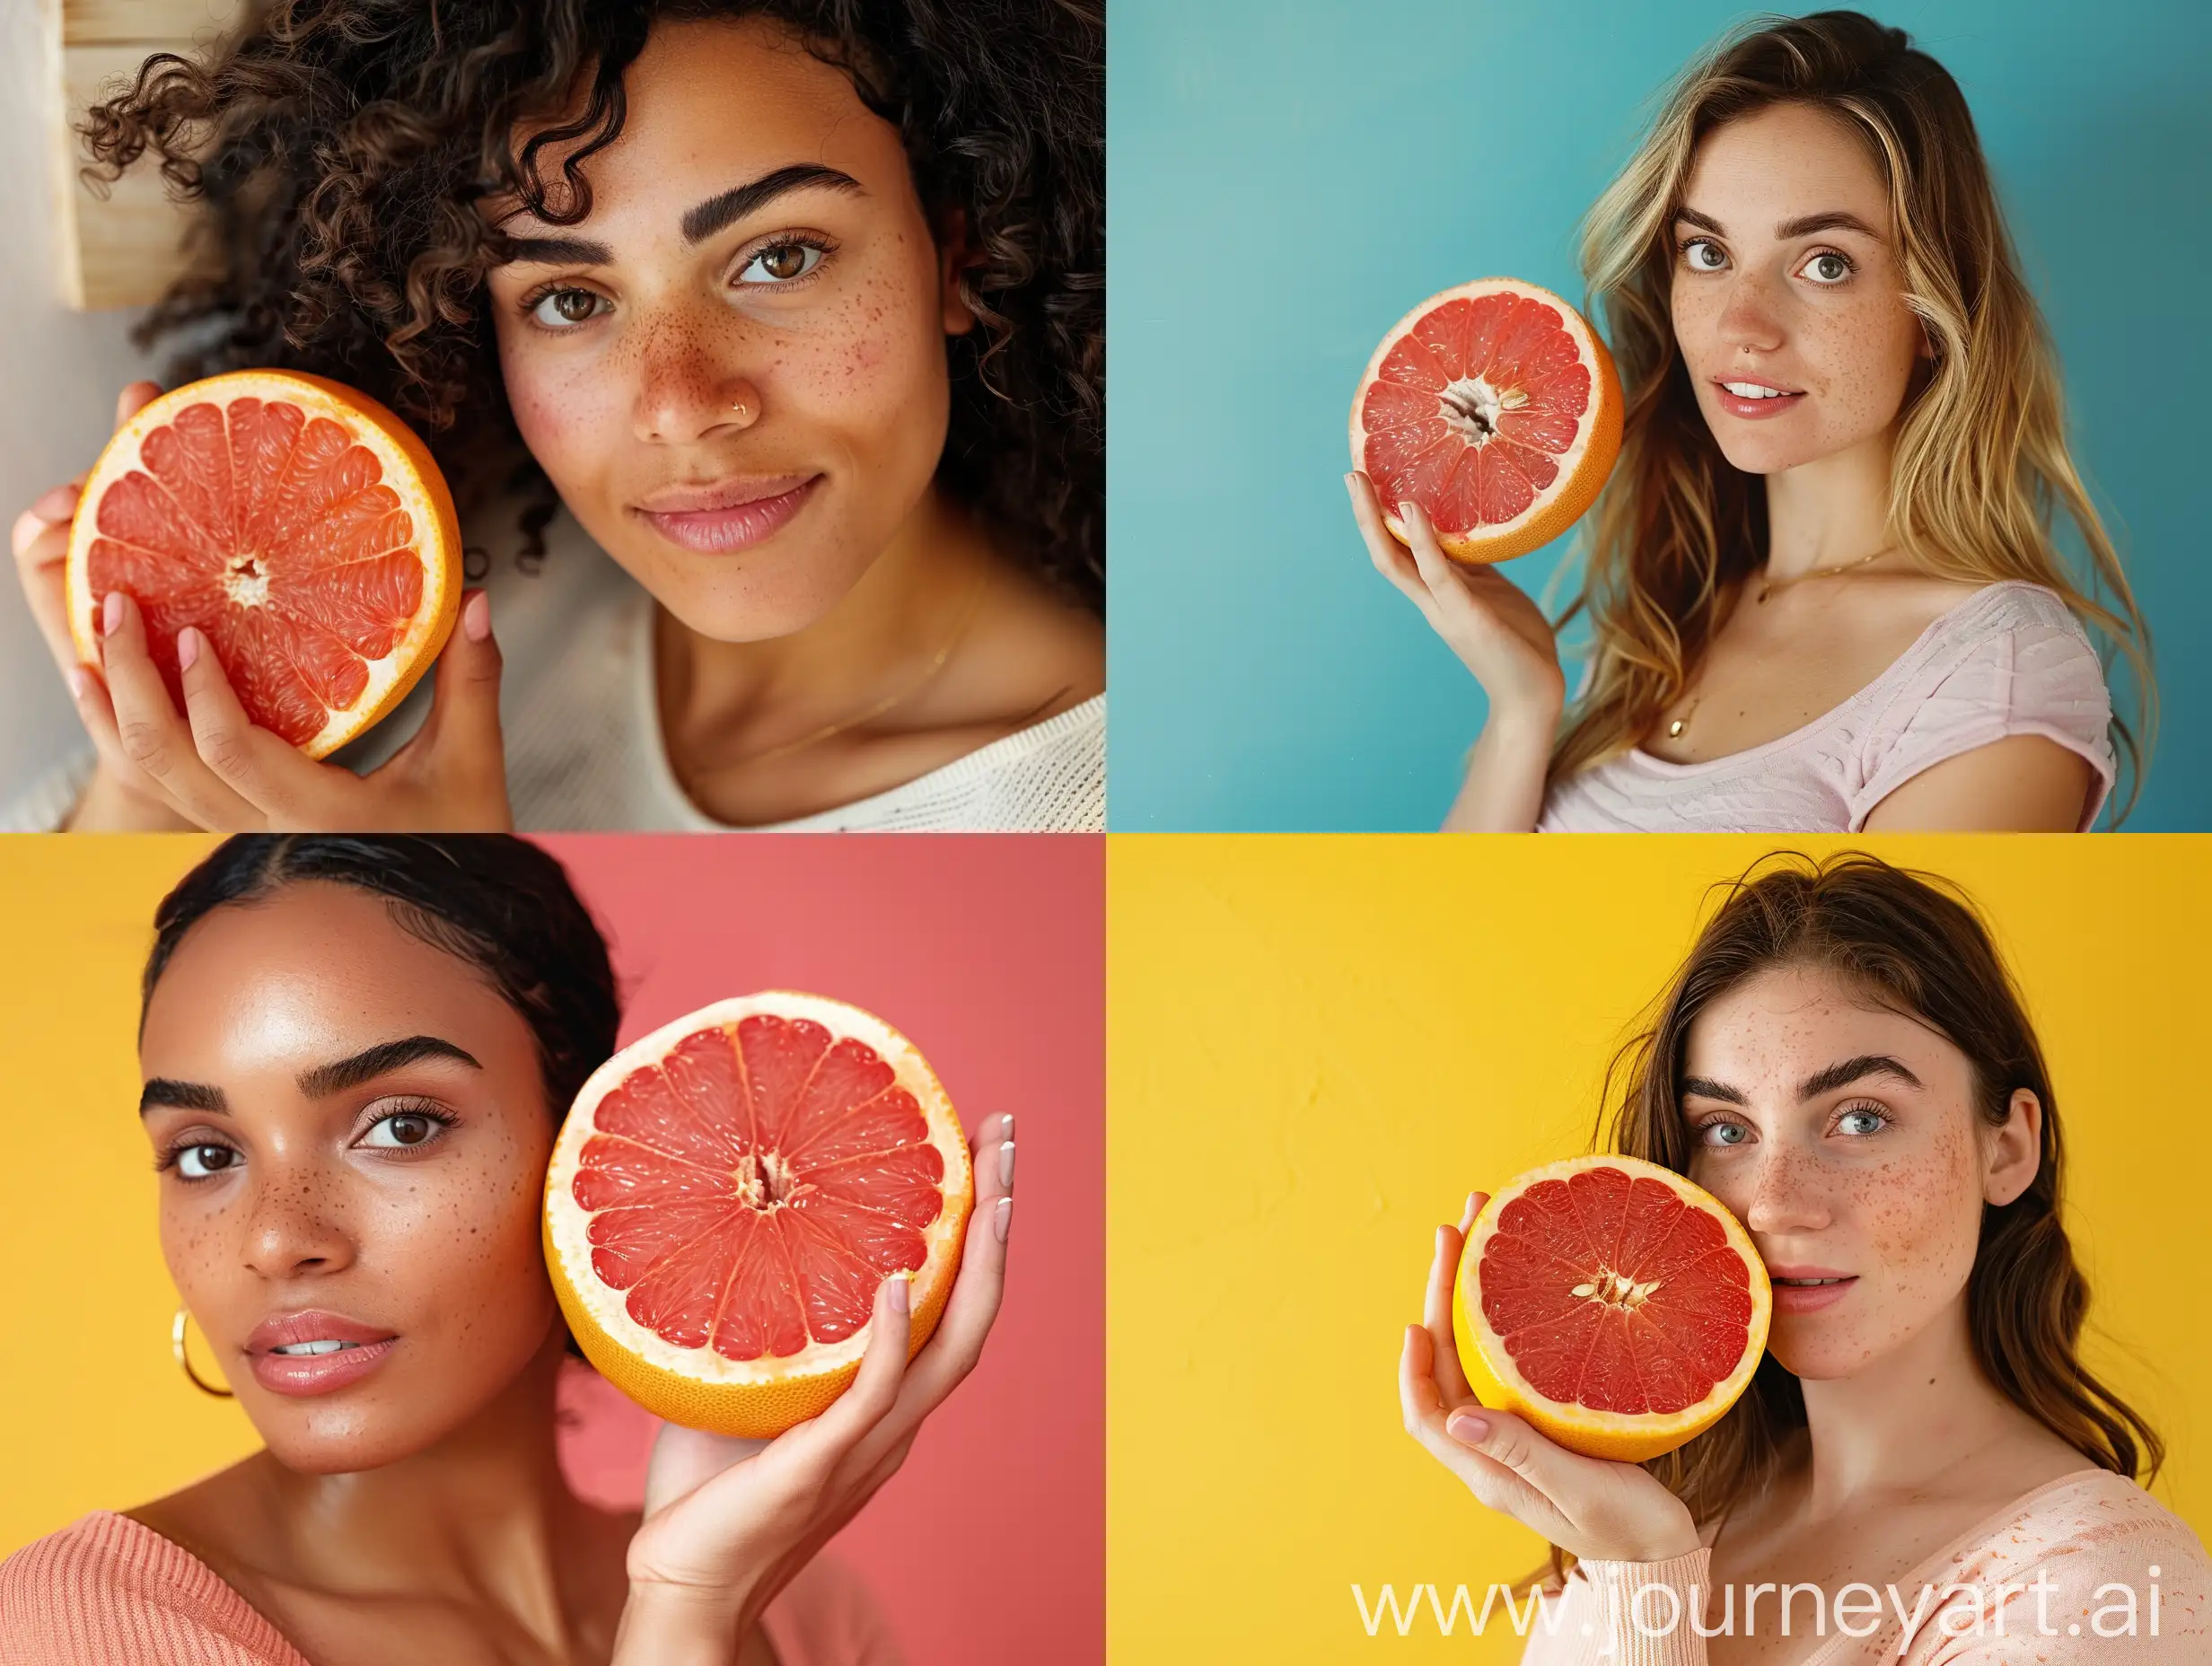 Healthy-Lifestyle-Woman-Holding-Fresh-Grapefruit-for-Advertising